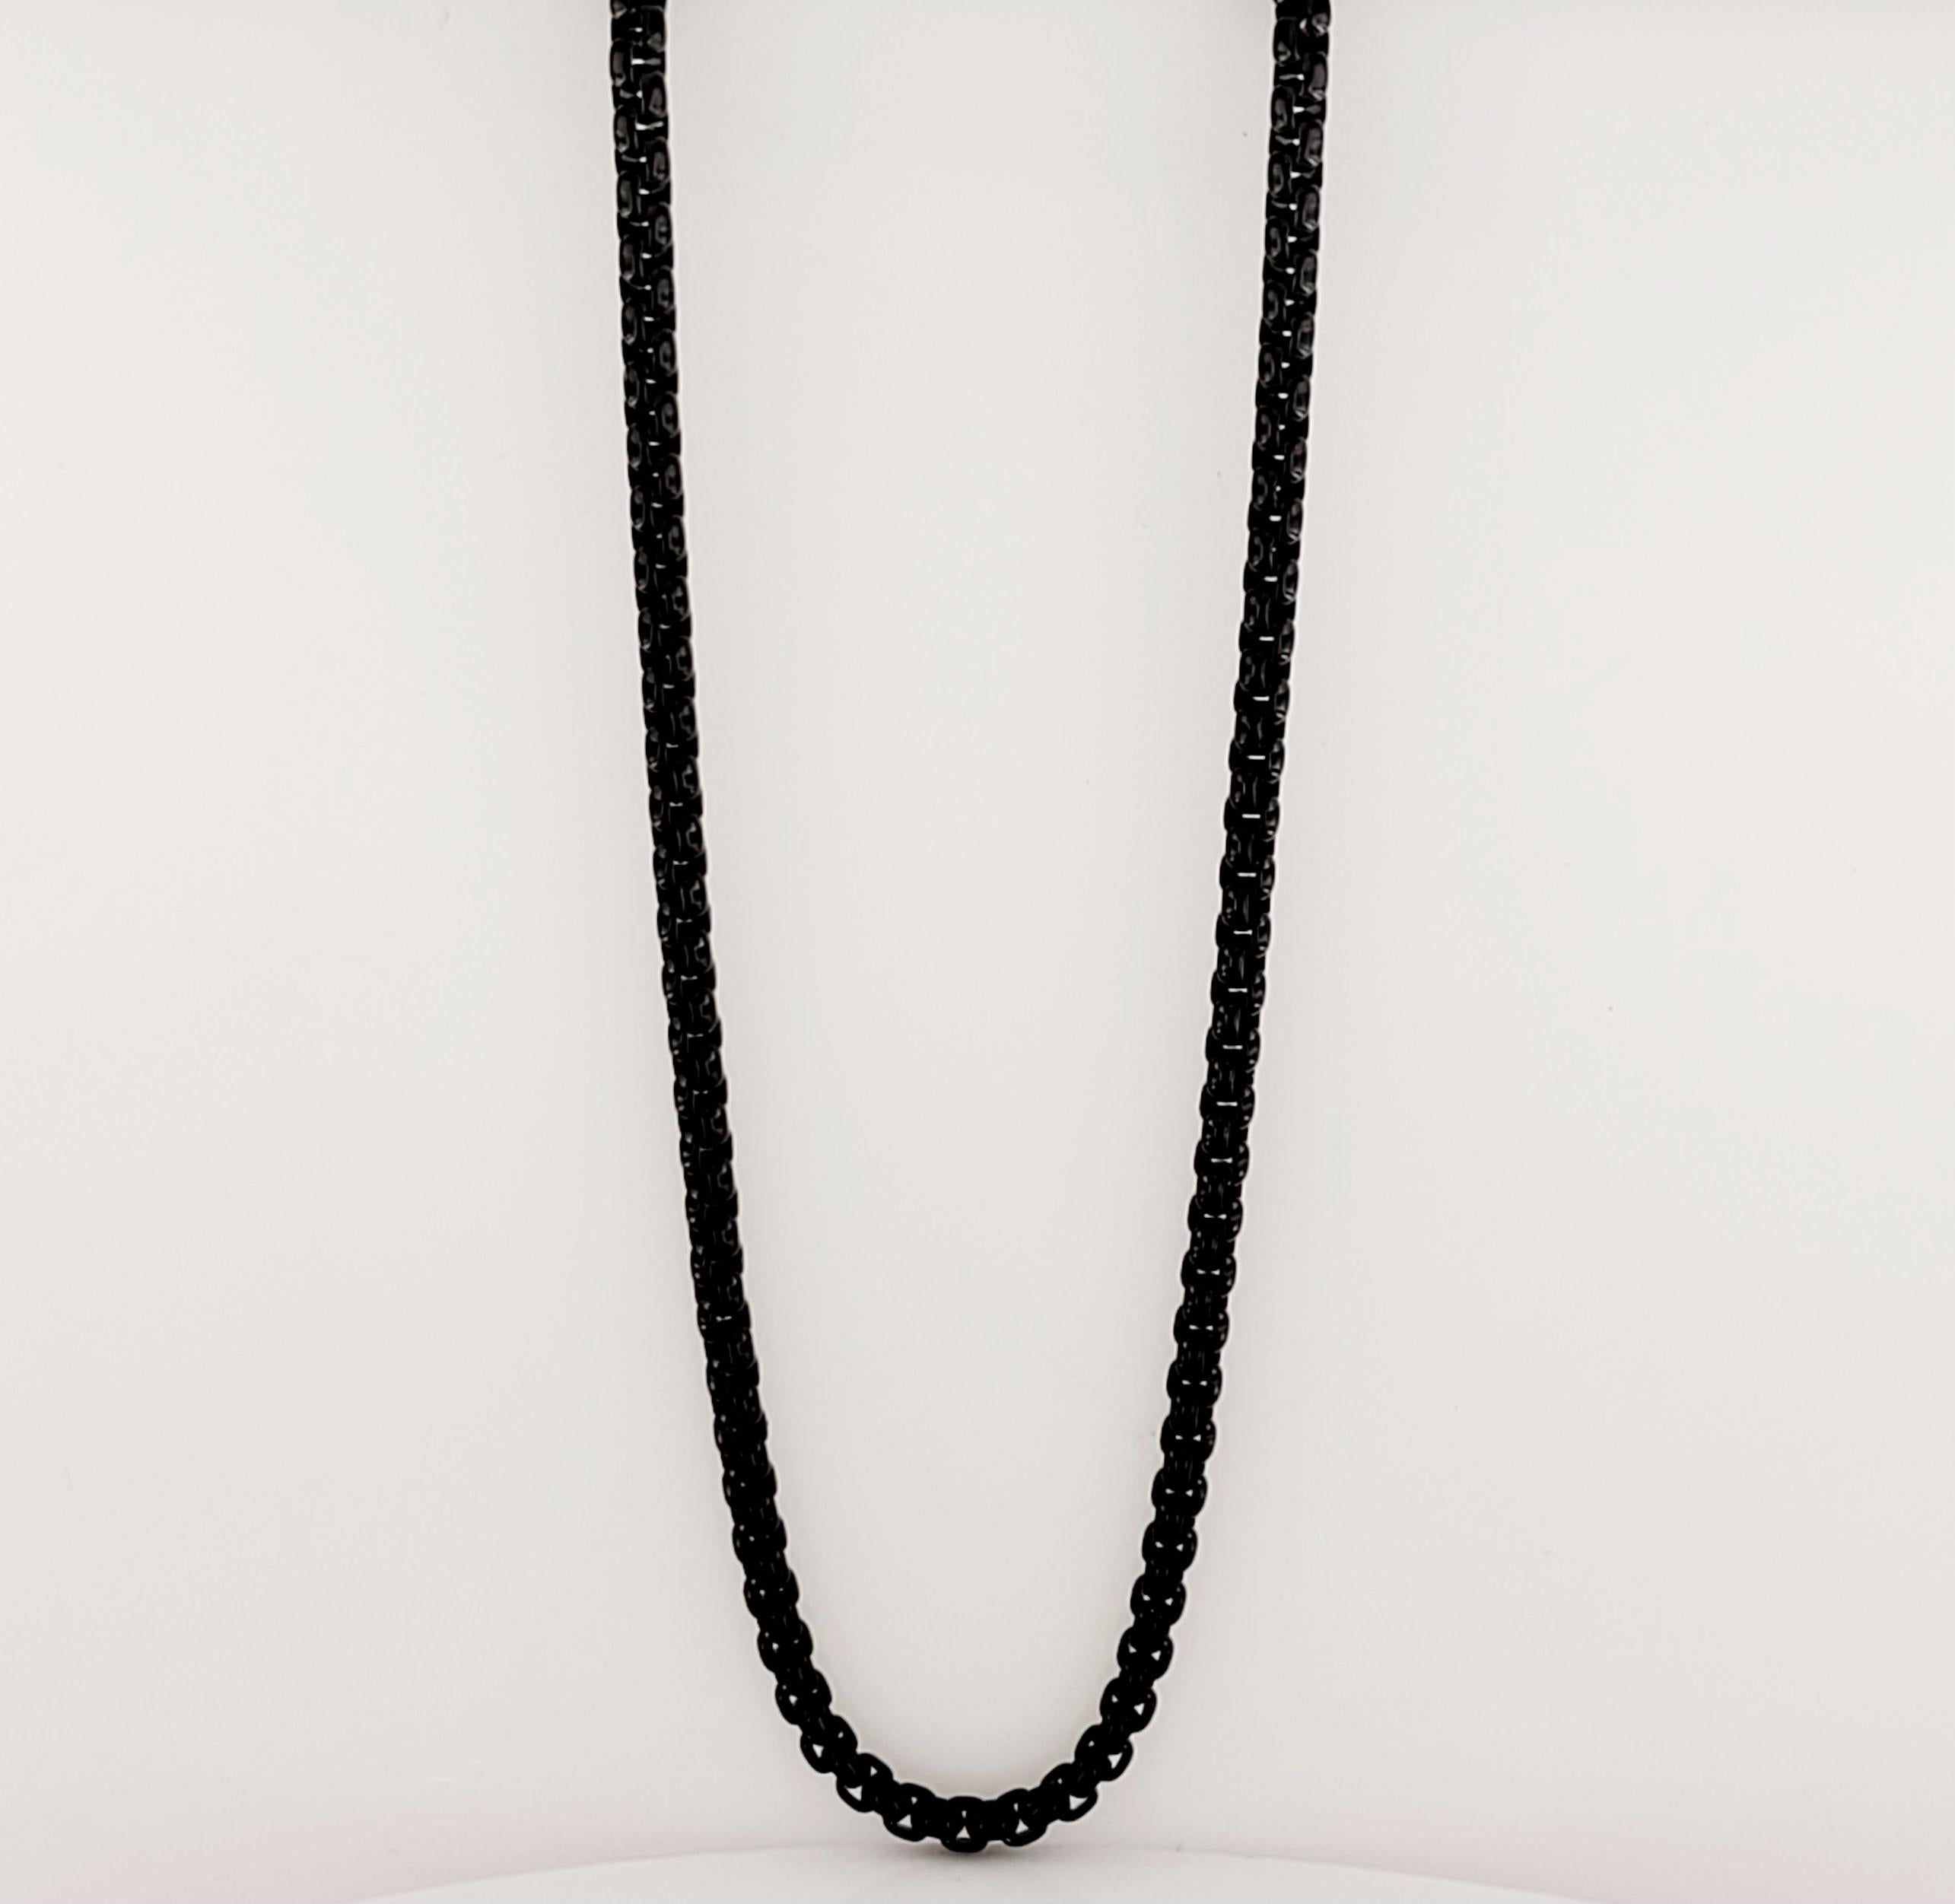 Brand David Yurman 
Black chain in sterling Silver 
Chain collection for Men
Chain Length 20'' Long 
Chain width 3mm
Condition New, never worn
Comes with David yurman pouch